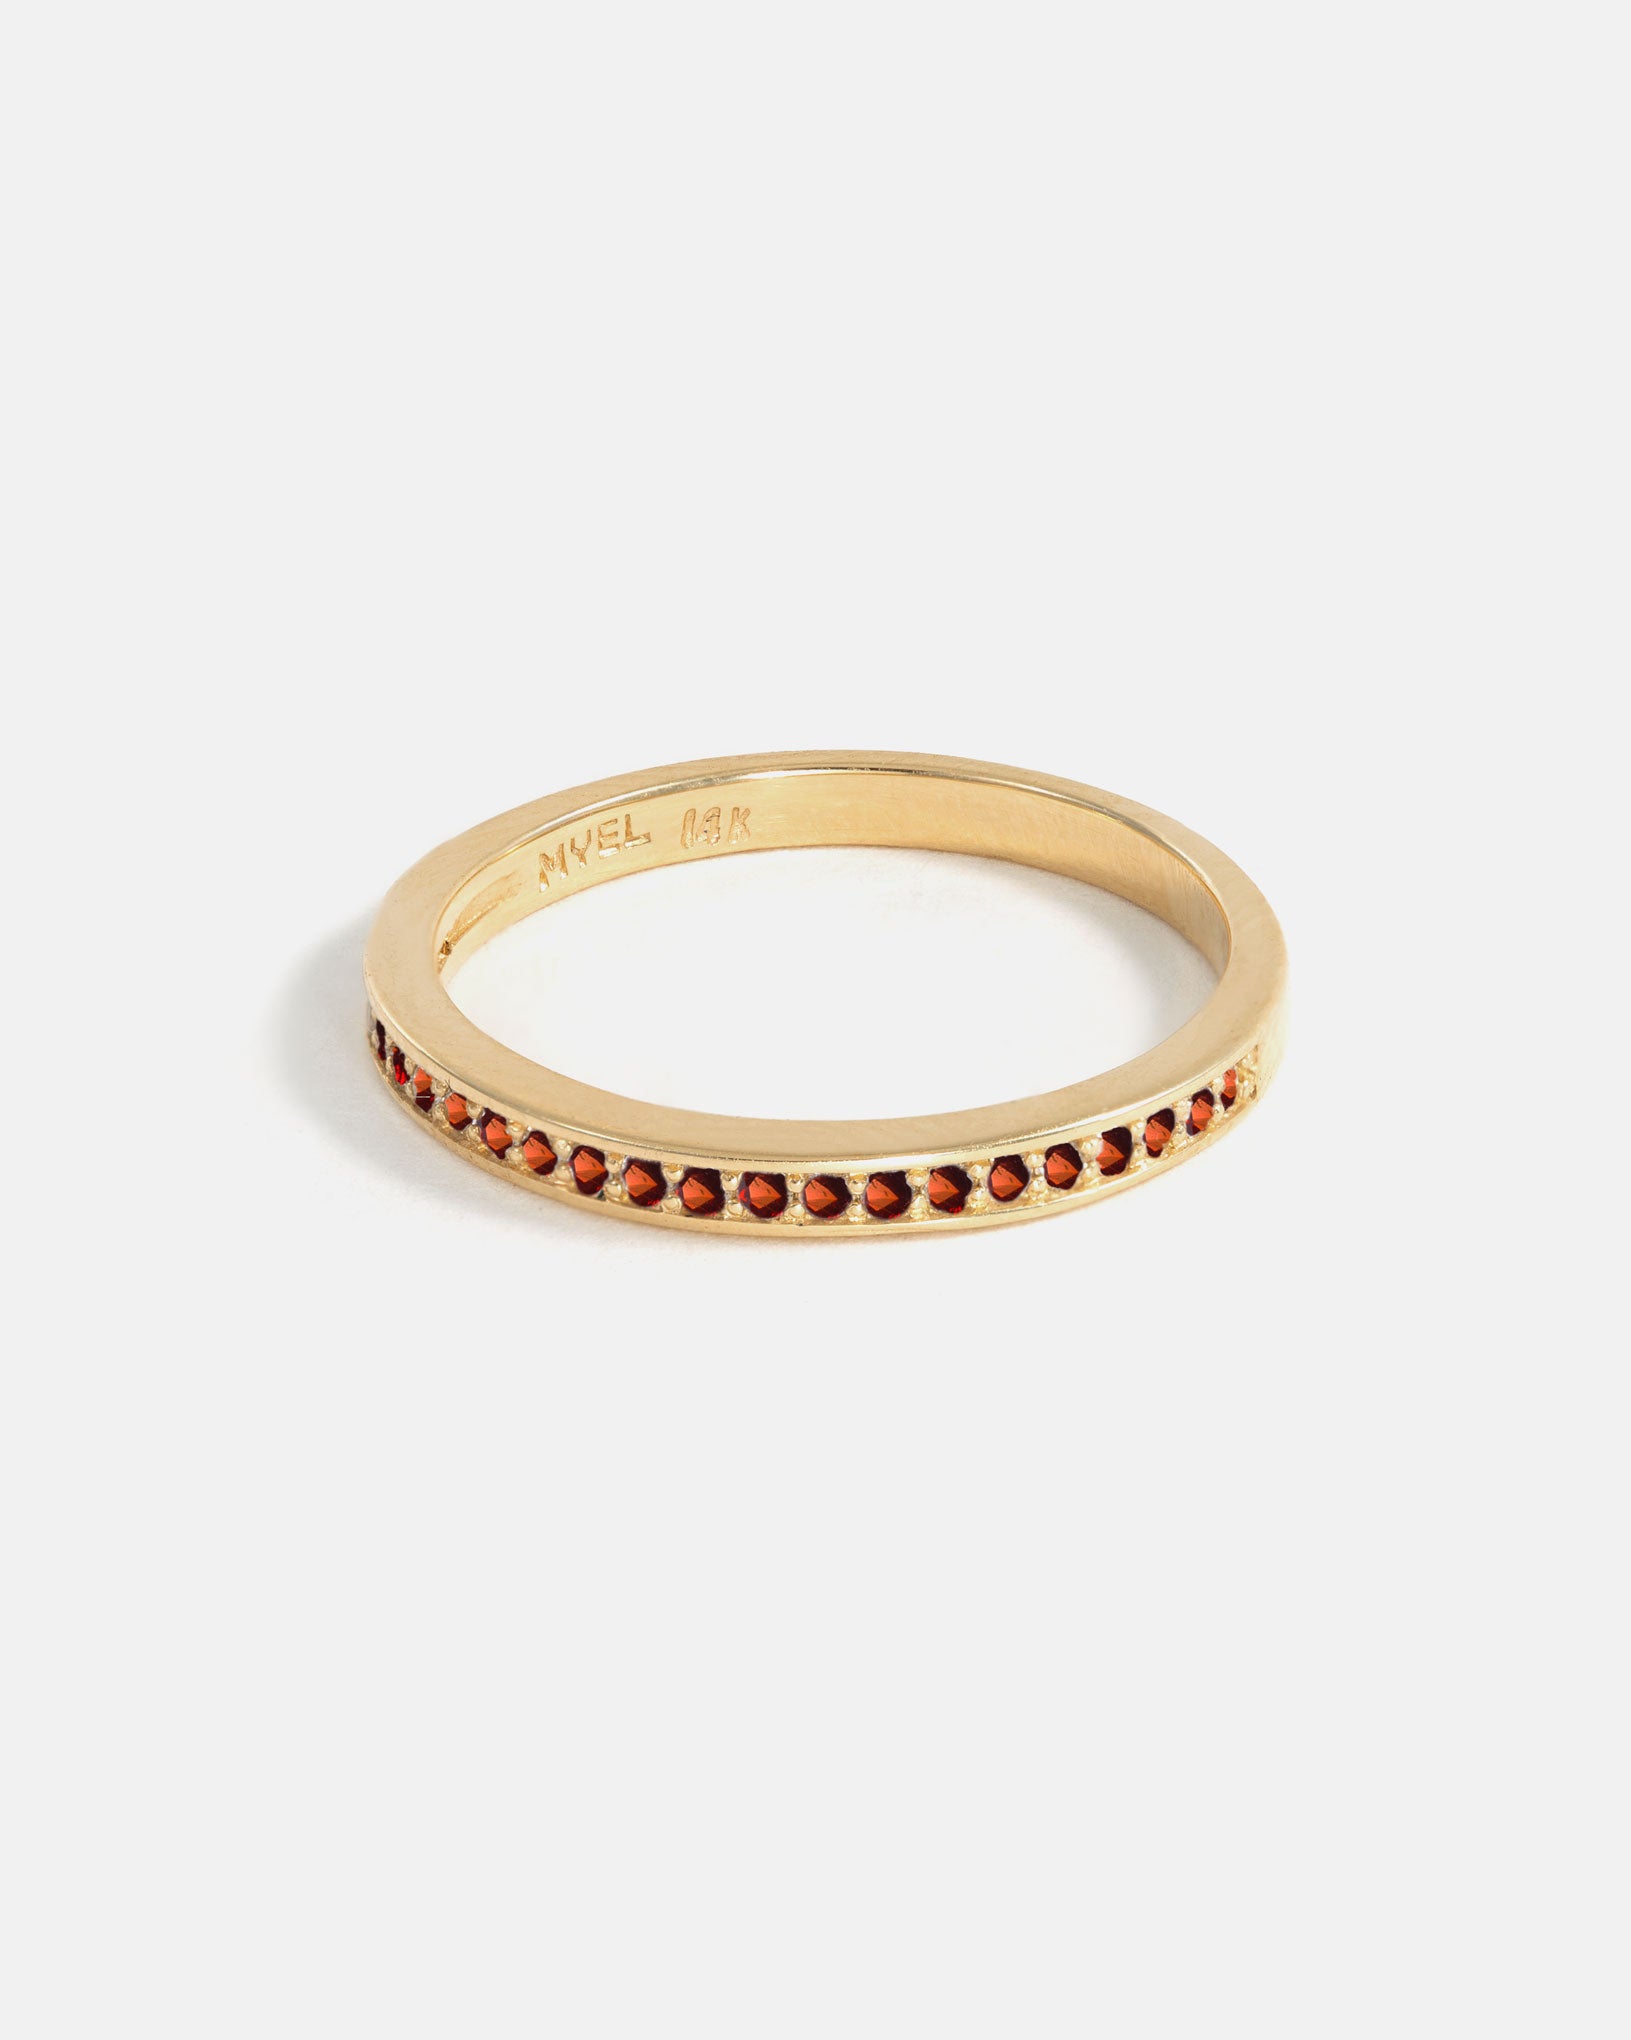 Pavé Ring in 14k Gold with Anthill Garnets